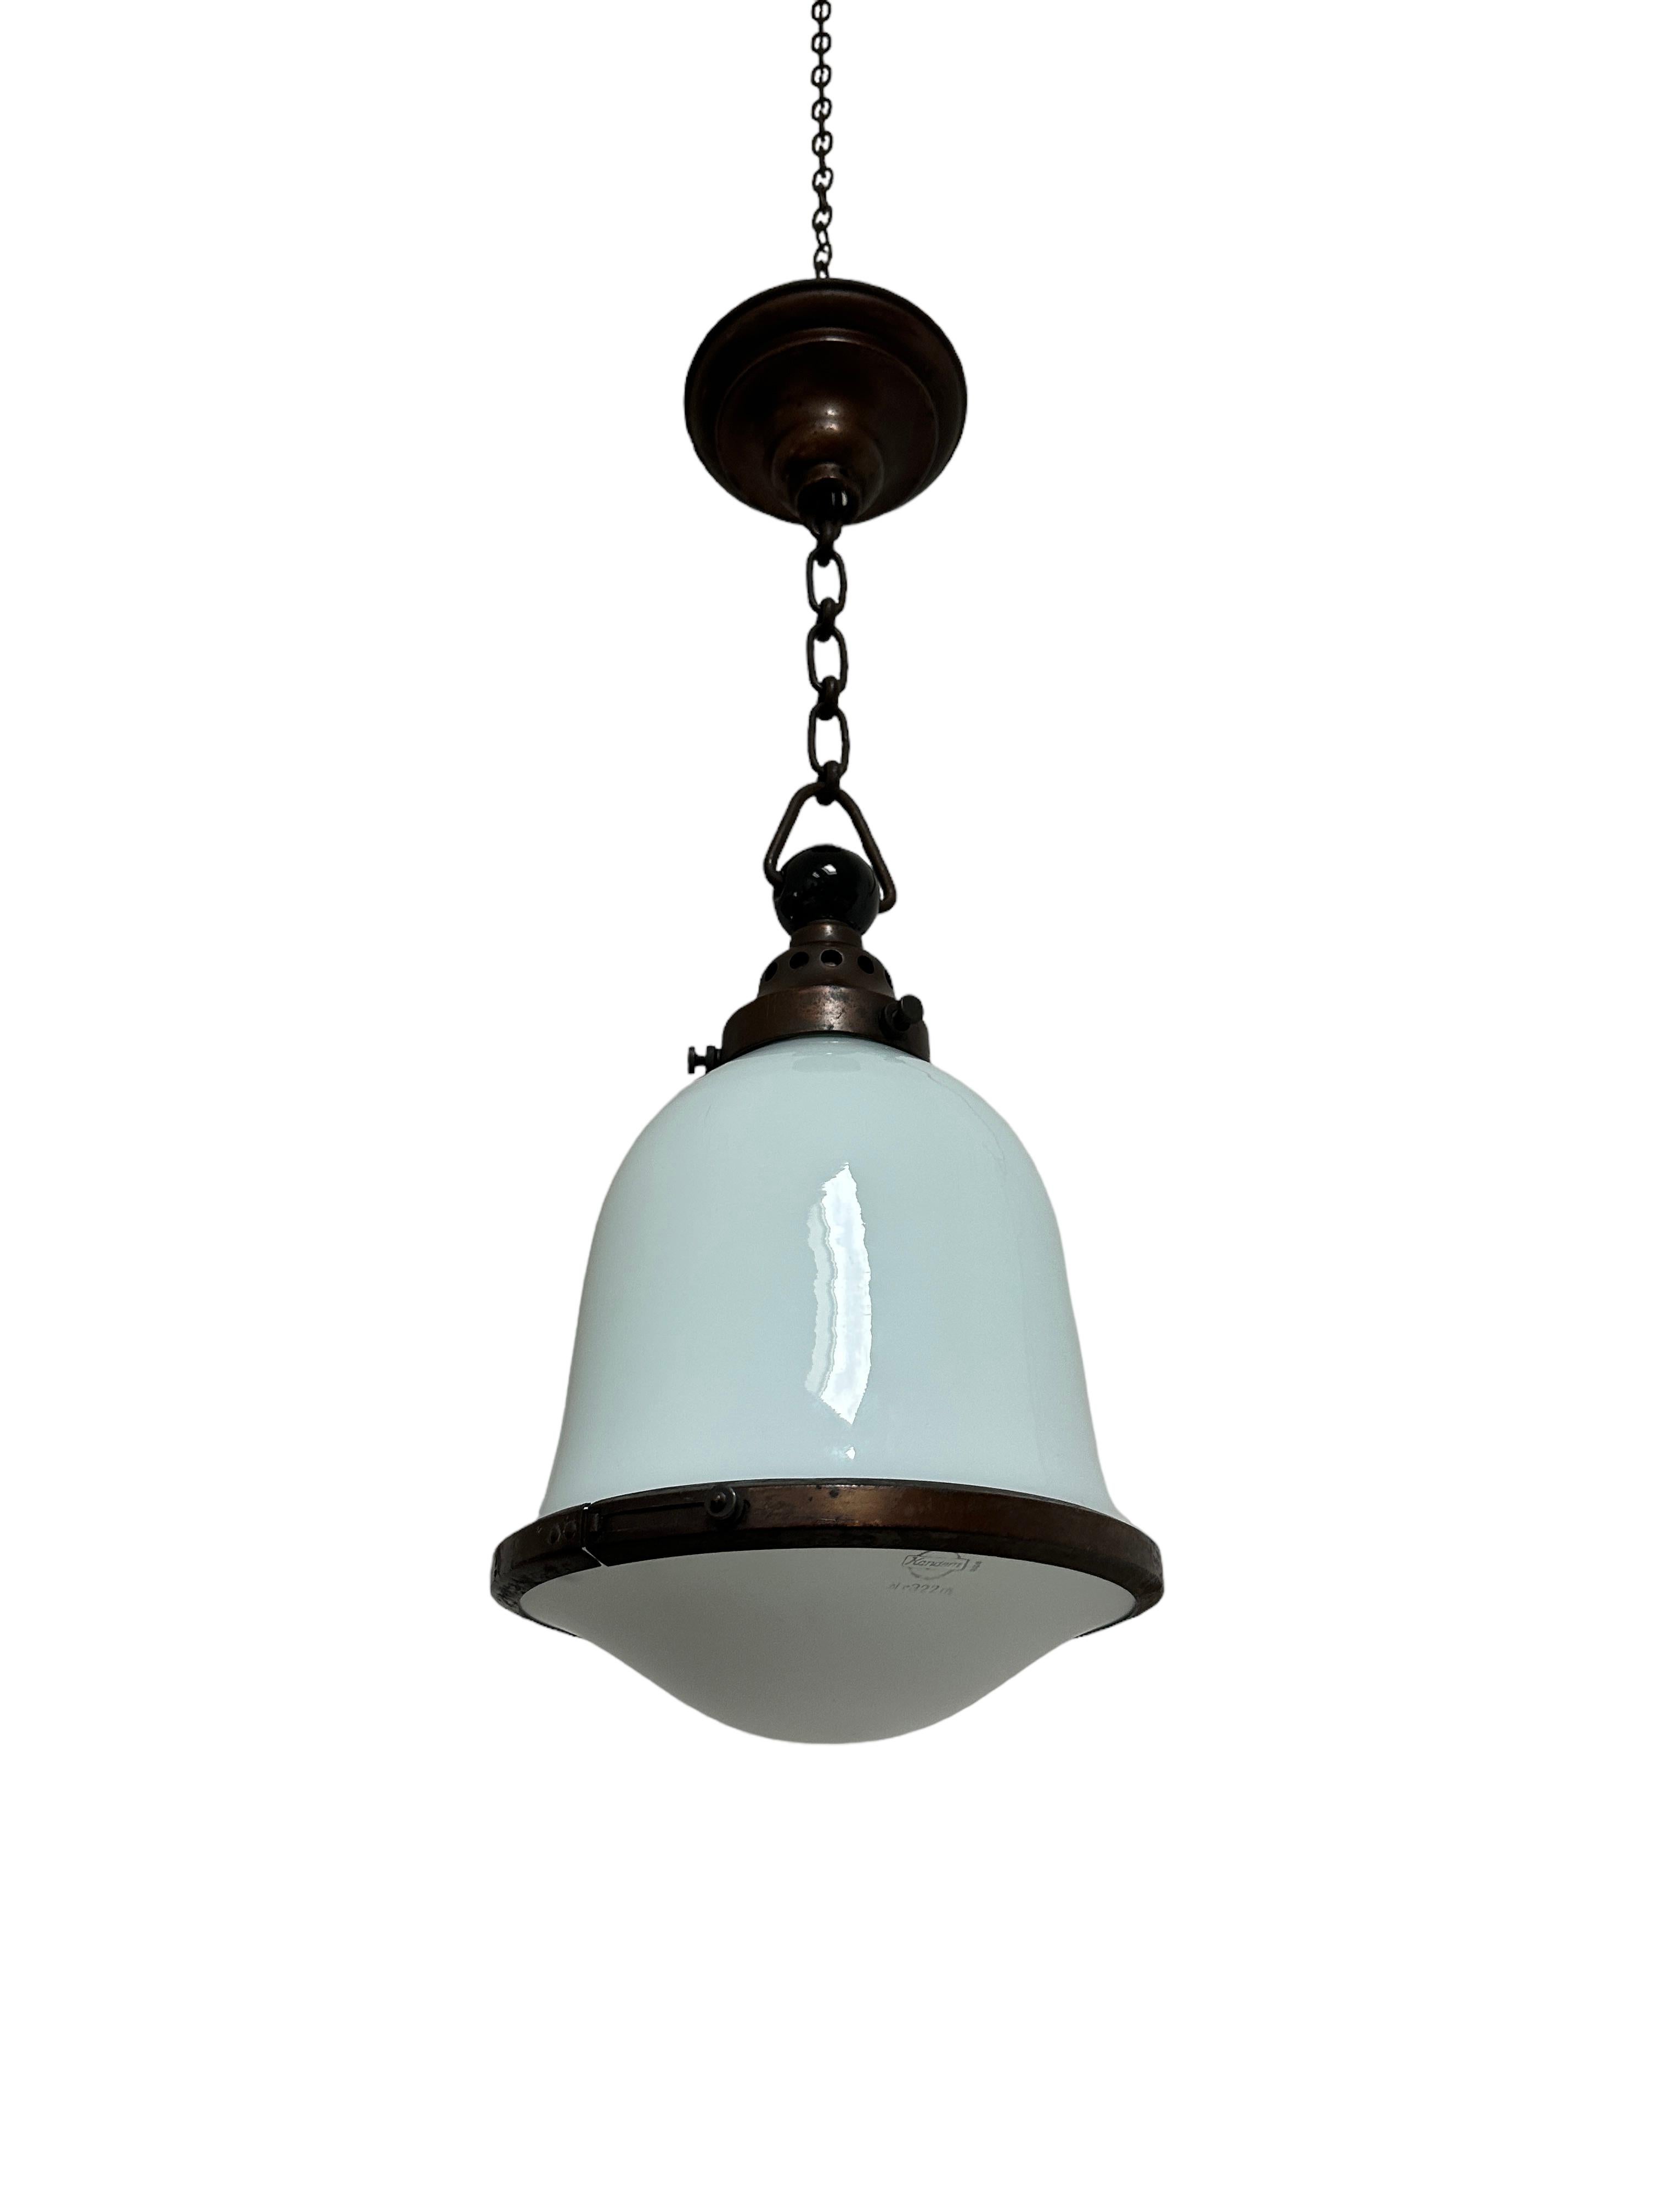 - An original and extremely rare two tone Bauhaus ceiling pendant by Kandem, Germany circa 1920.
- The pendant consists of two glass sections, the upper opaline fully stamped, the lower dish etched and again stamped with the Kandem logo and model